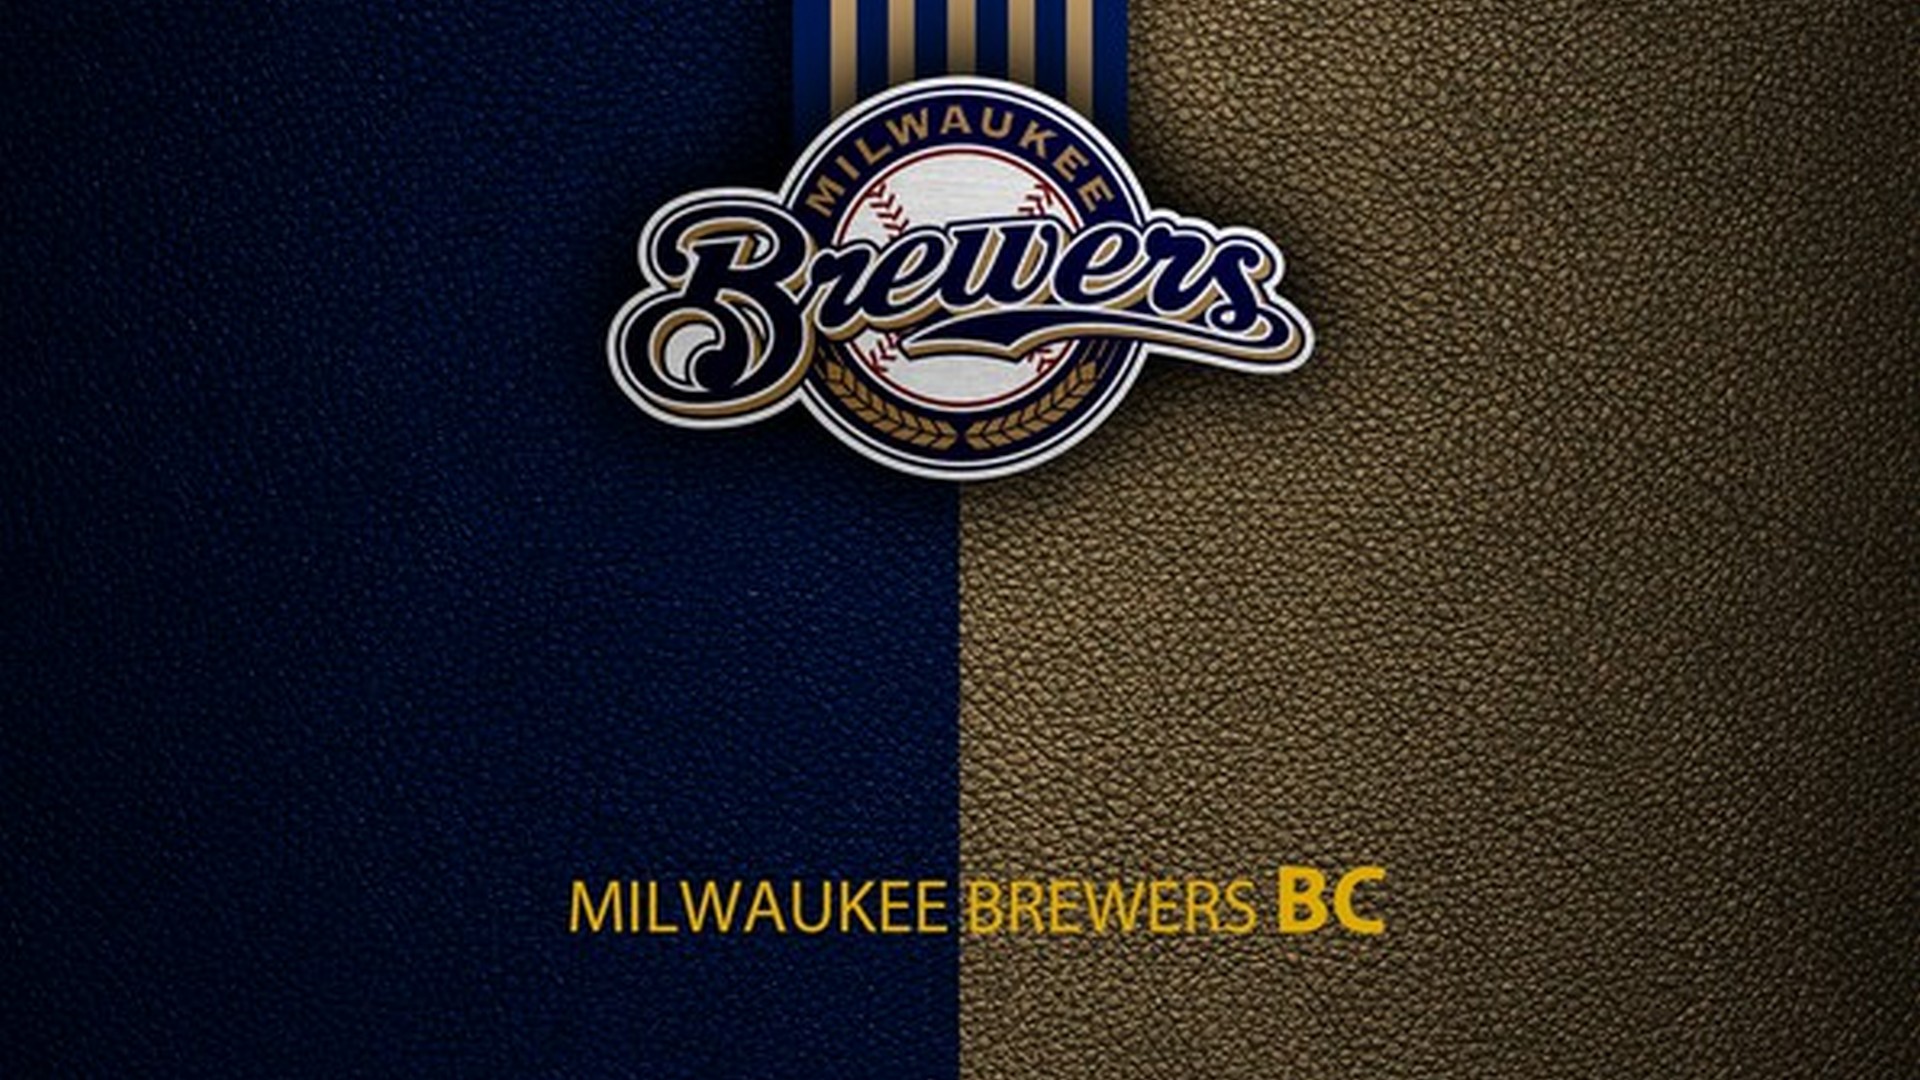 Milwaukee Brewers MLB HD Wallpapers With high-resolution 1920X1080 pixel. You can use this wallpaper for Mac Desktop Wallpaper, Laptop Screensavers, Android Wallpapers, Tablet or iPhone Home Screen and another mobile phone device